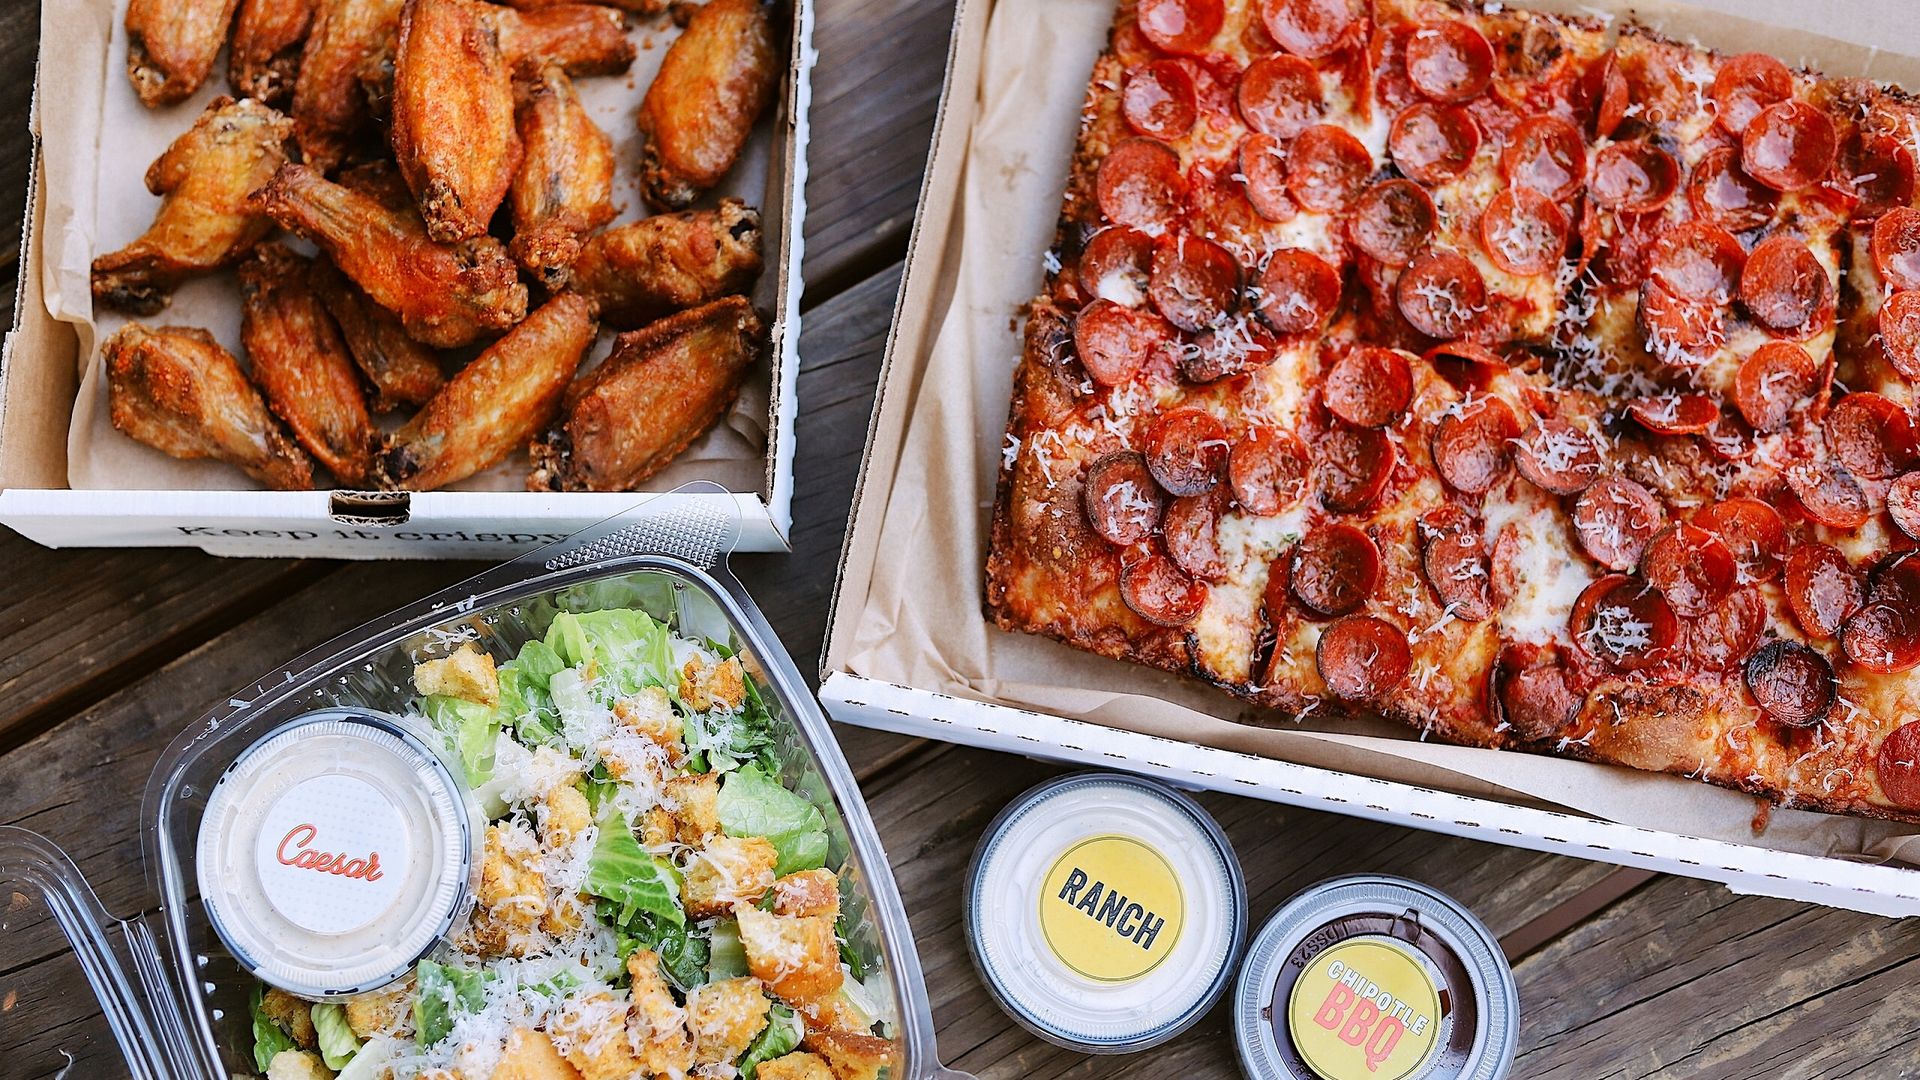 Chicken wings, salad and a Detroit-style pizza.